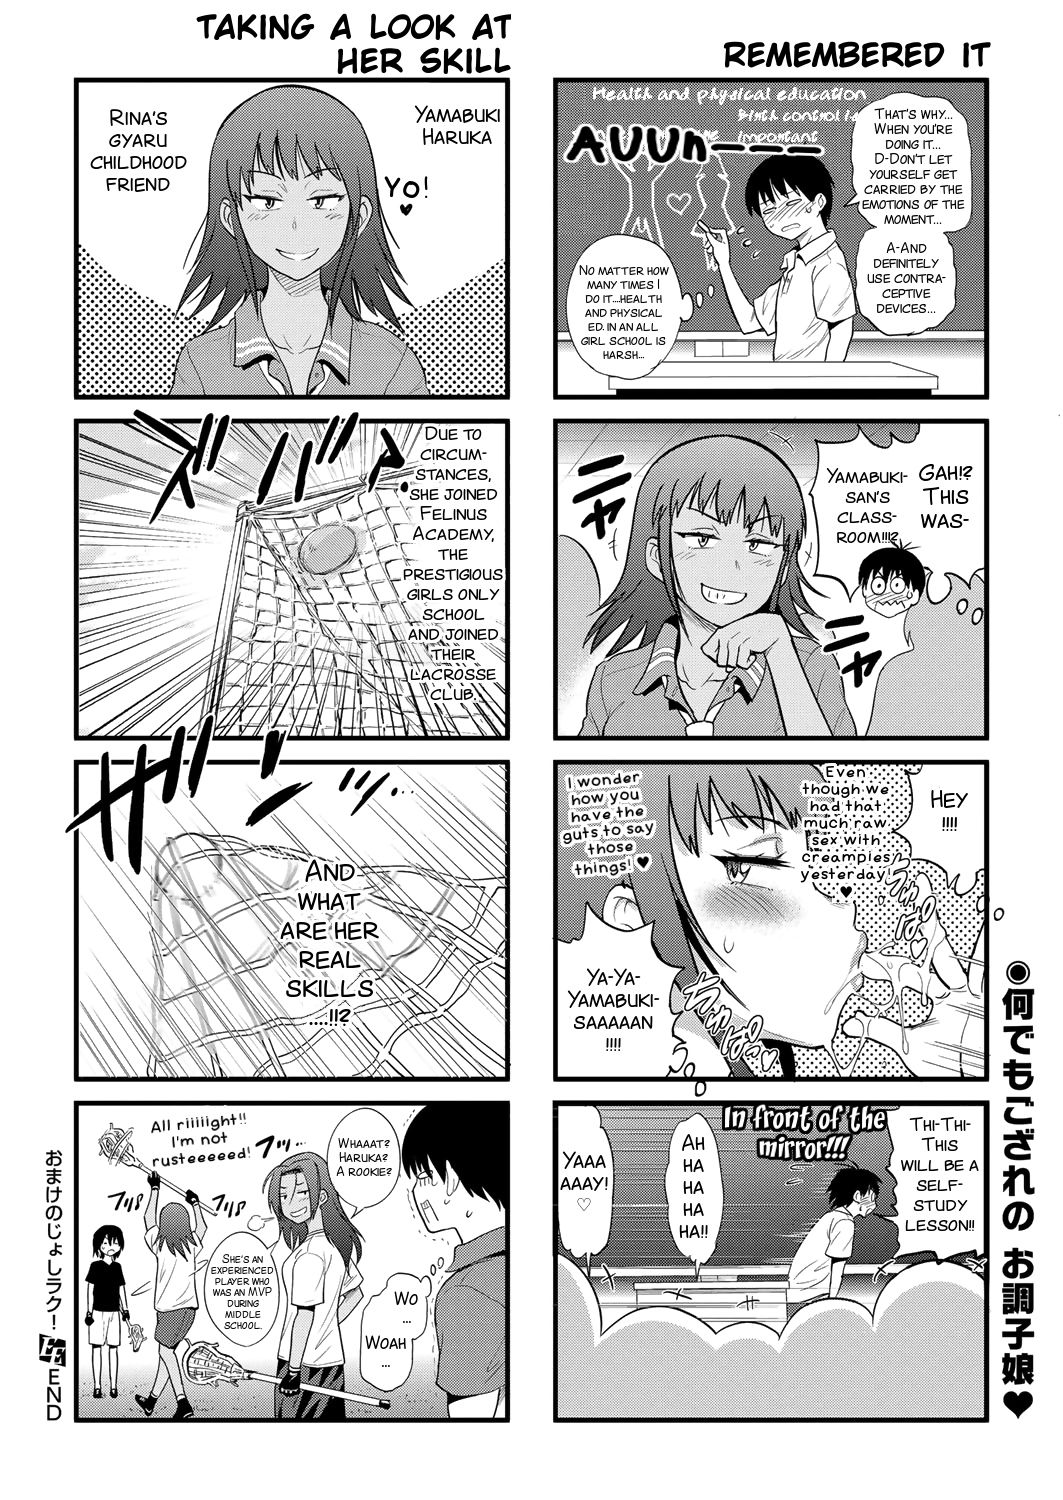 [DISTANCE] Joshi Luck! ~2 Years Later~ Ch. 7-8.5 [English] [SMDC] [Digital] [DISTANCE] じょしラク! ～2 Years Later～ 第7-8.5話 [英訳] [DL版]